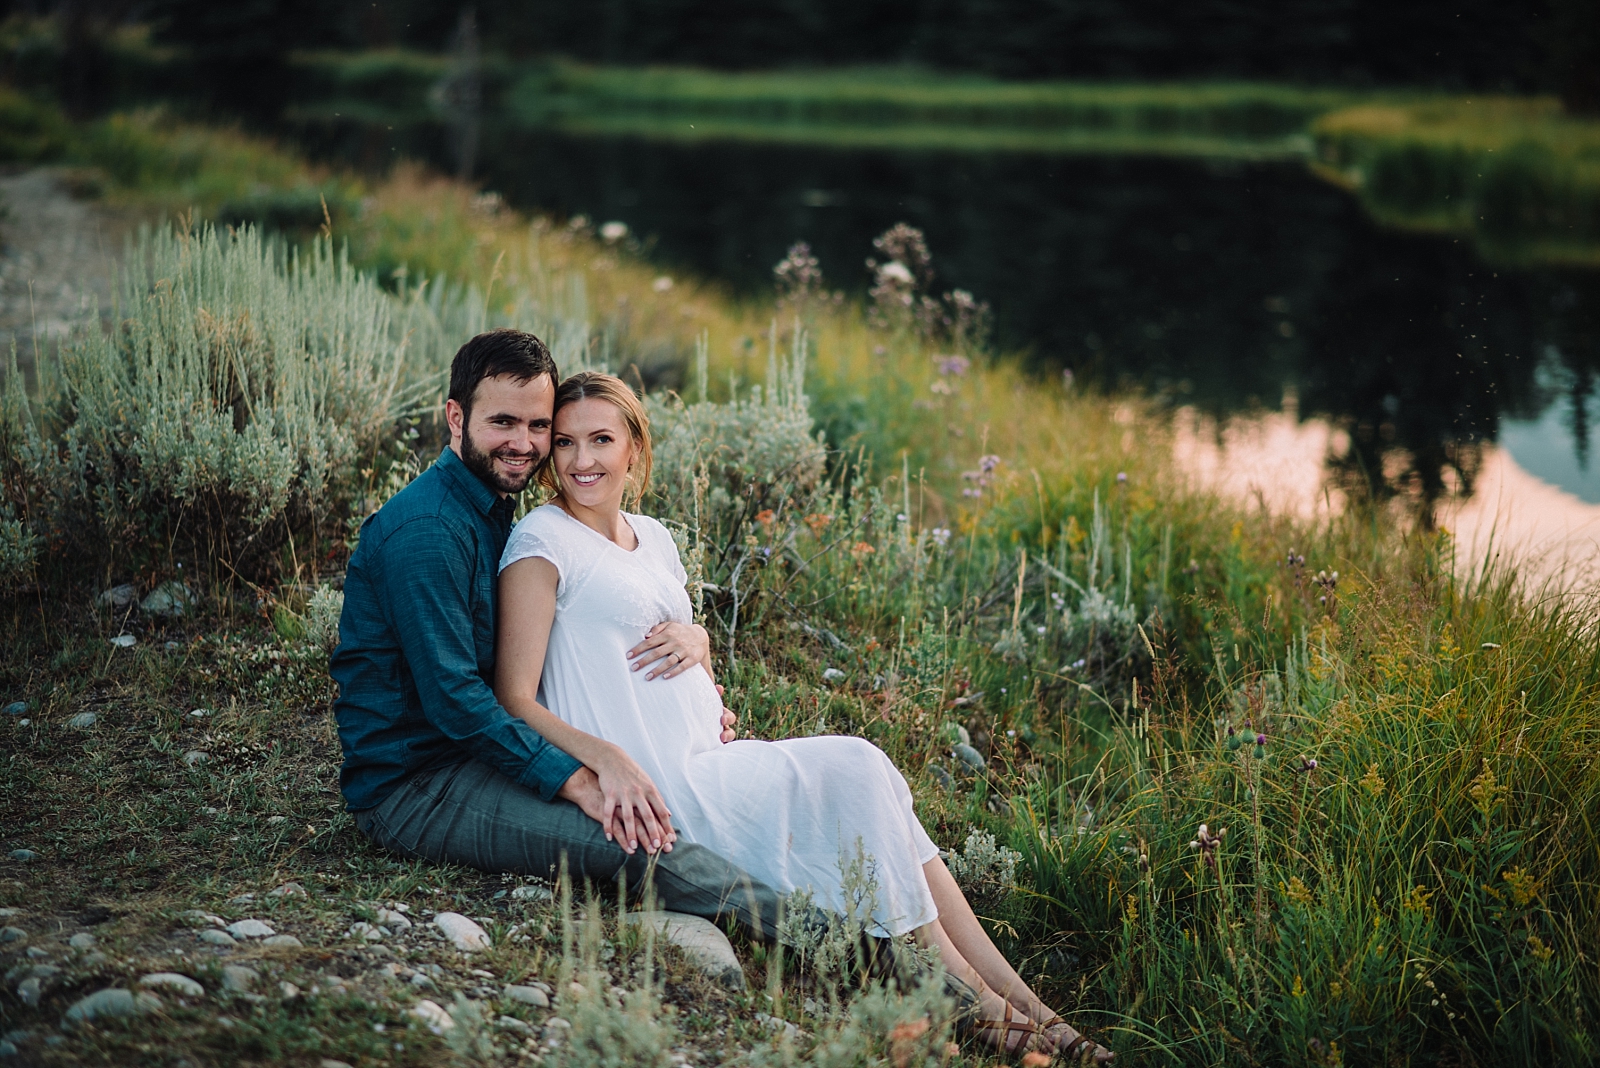 maternity pictures at schwabacher landing